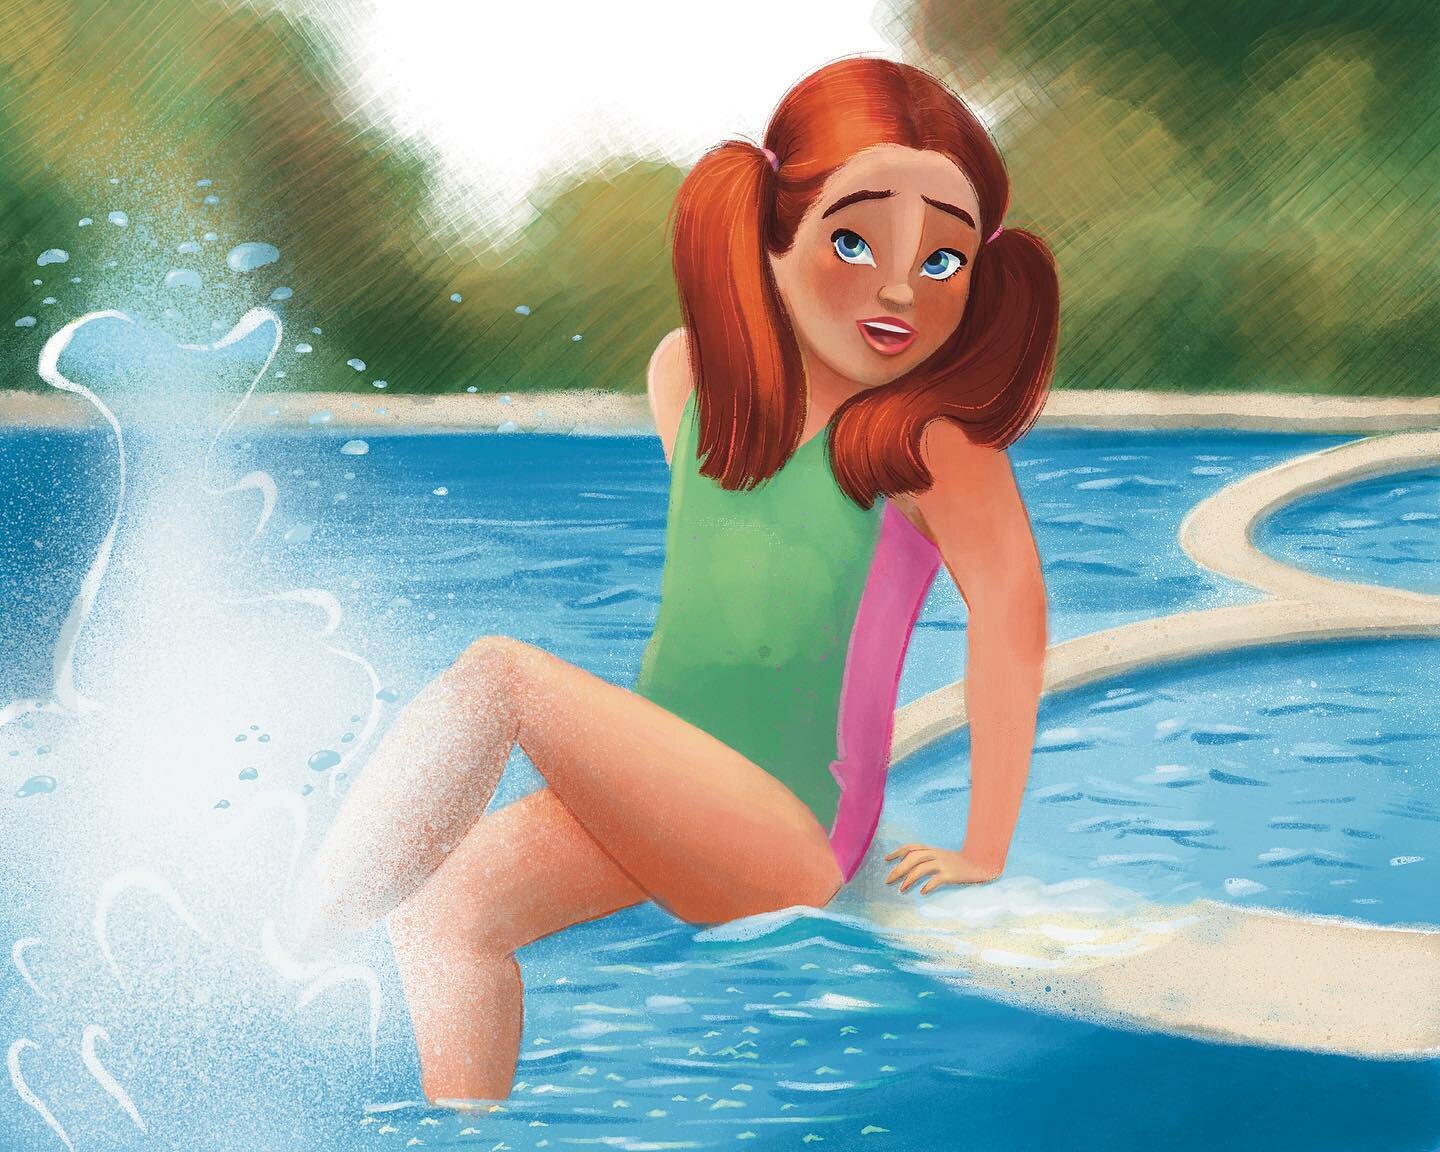 More poolside illustration - trying to draw more children and I actually find them harder to draw then adults. Is that normal? 😂 
#nadineaydinart #splahing #childrensbookillustration #kidlitart